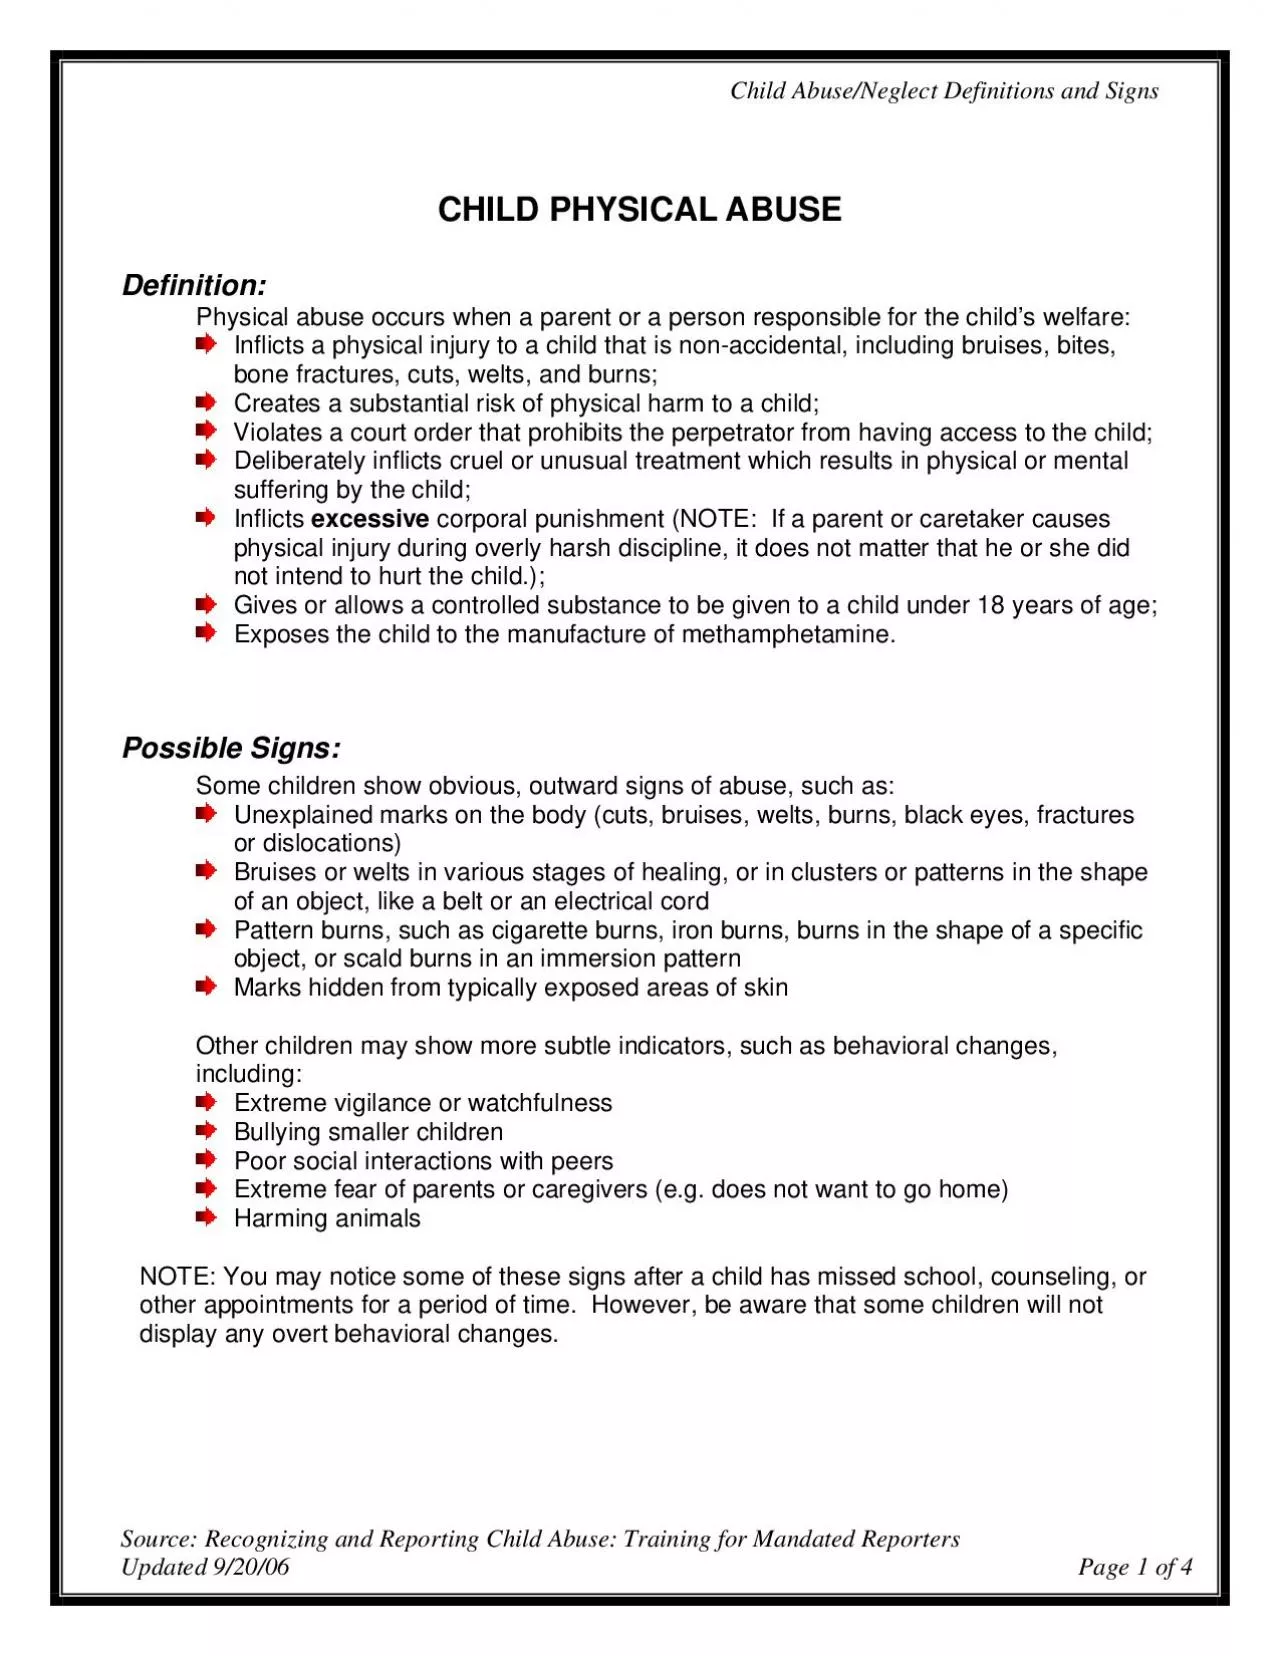 Child AbuseNeglect Definitions and Signs